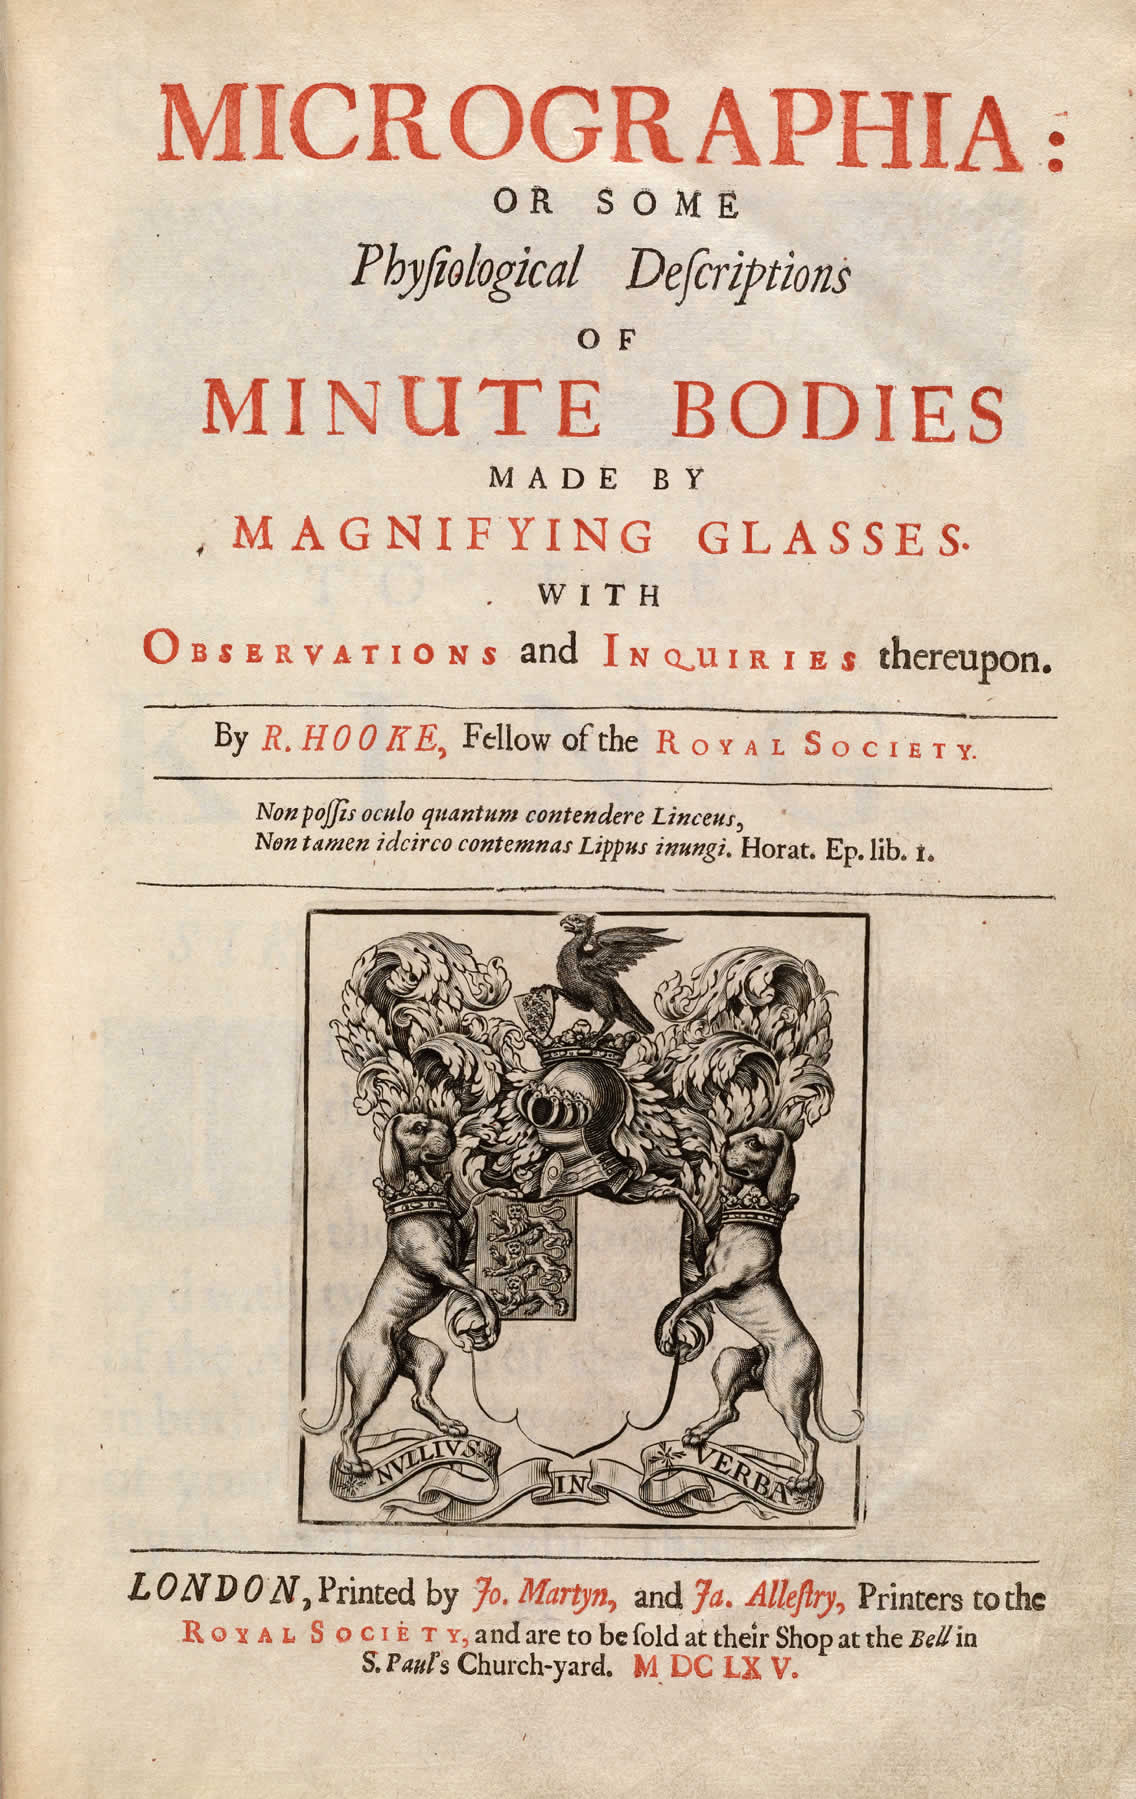 Title page image from Micrographia by Robert Hooke.